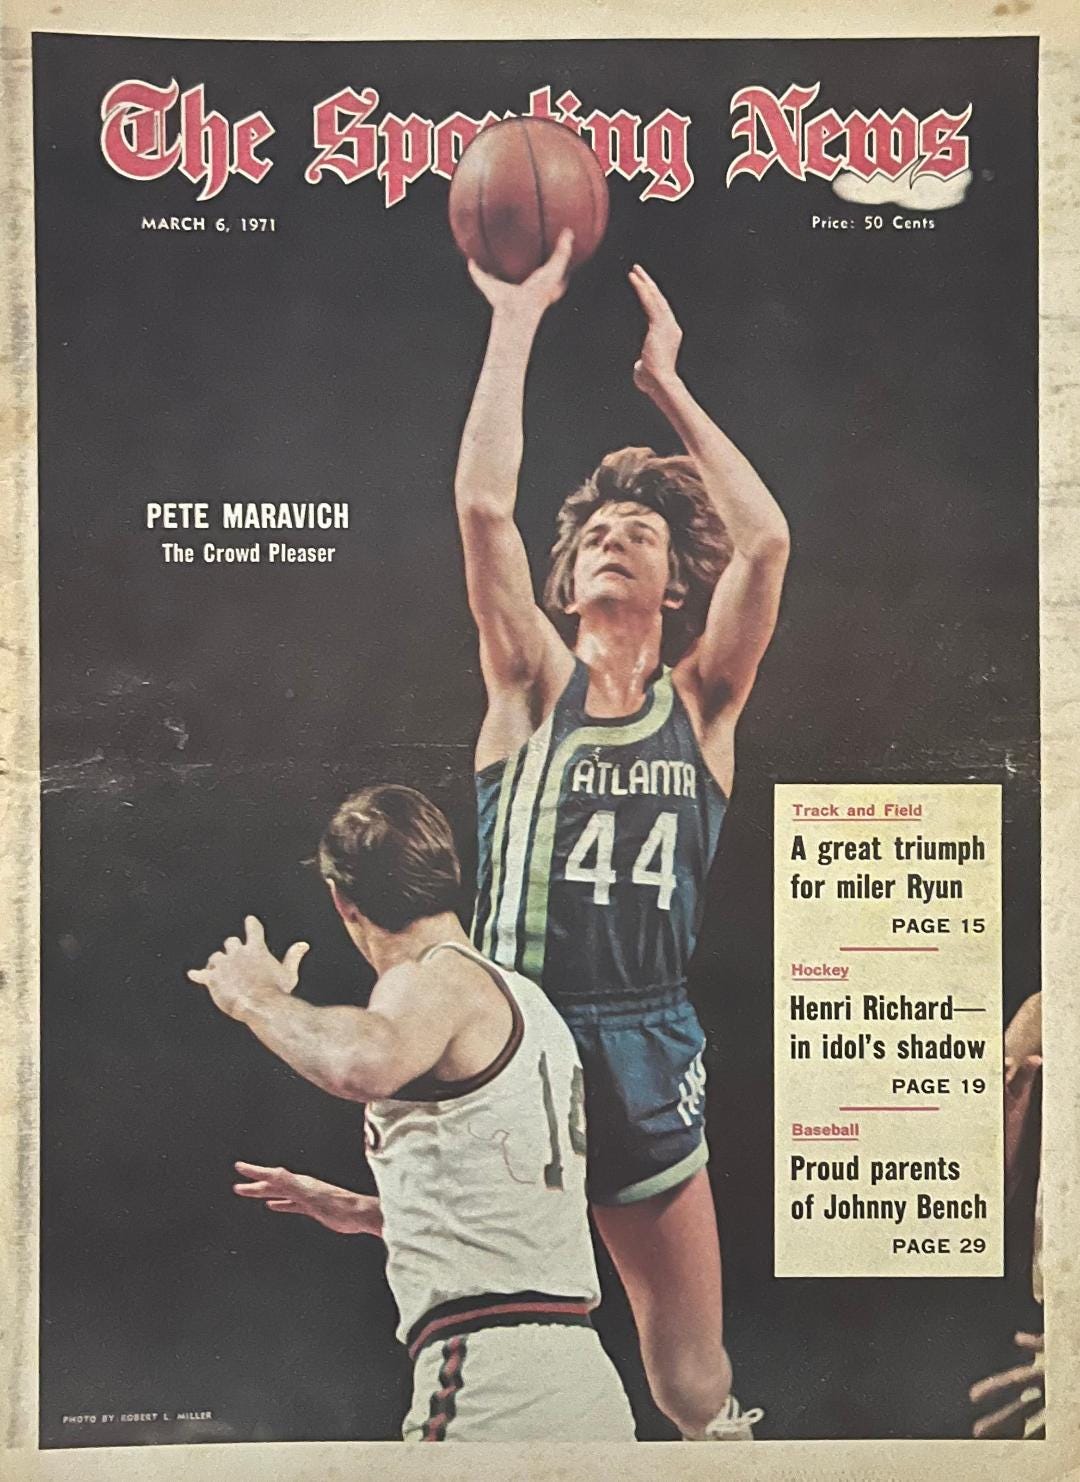 Pistol Pete Maravich Named Larry Bird The Best Player In The NBA Before His  Death: He's Just The Very Best. - Fadeaway World